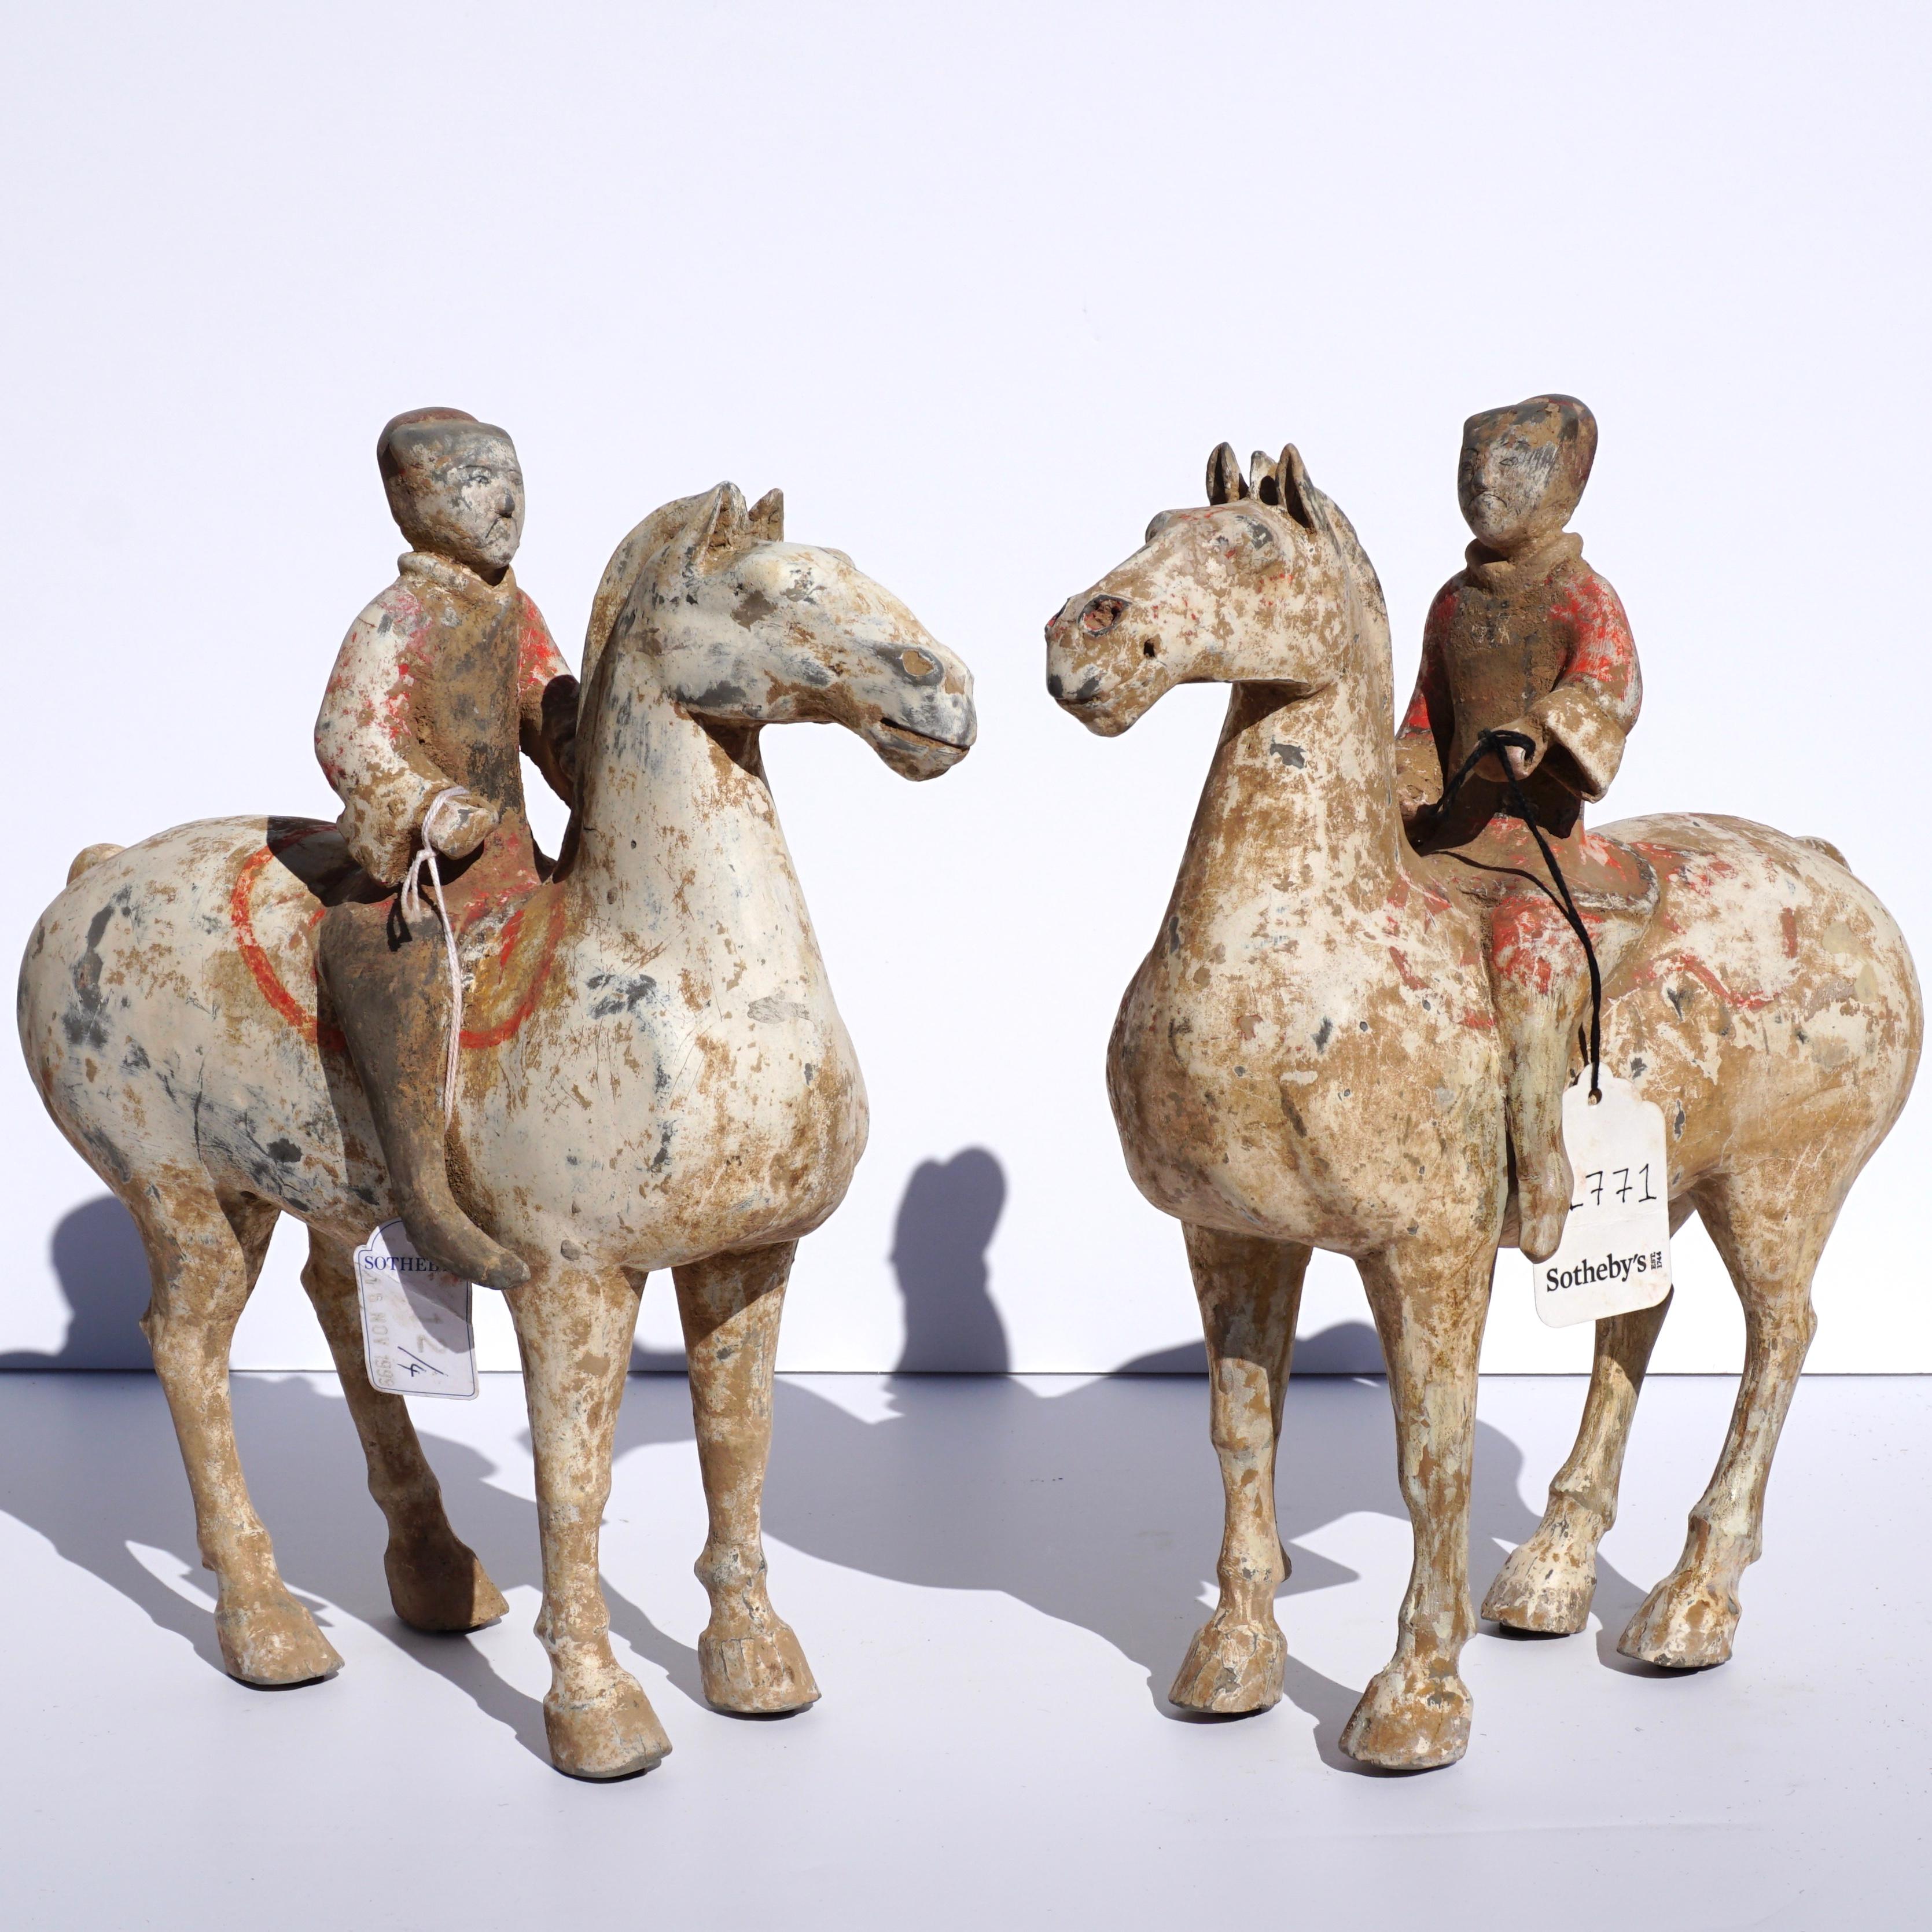 A wonderful pair of Ex Sotheby’s painted Polychrome equestrian horse and riders made from gray pottery, presents beautifully and guaranteed authentic with provenance and COA.

Measures: Height 11.5 inches and width 11 inches

Condition: Possible